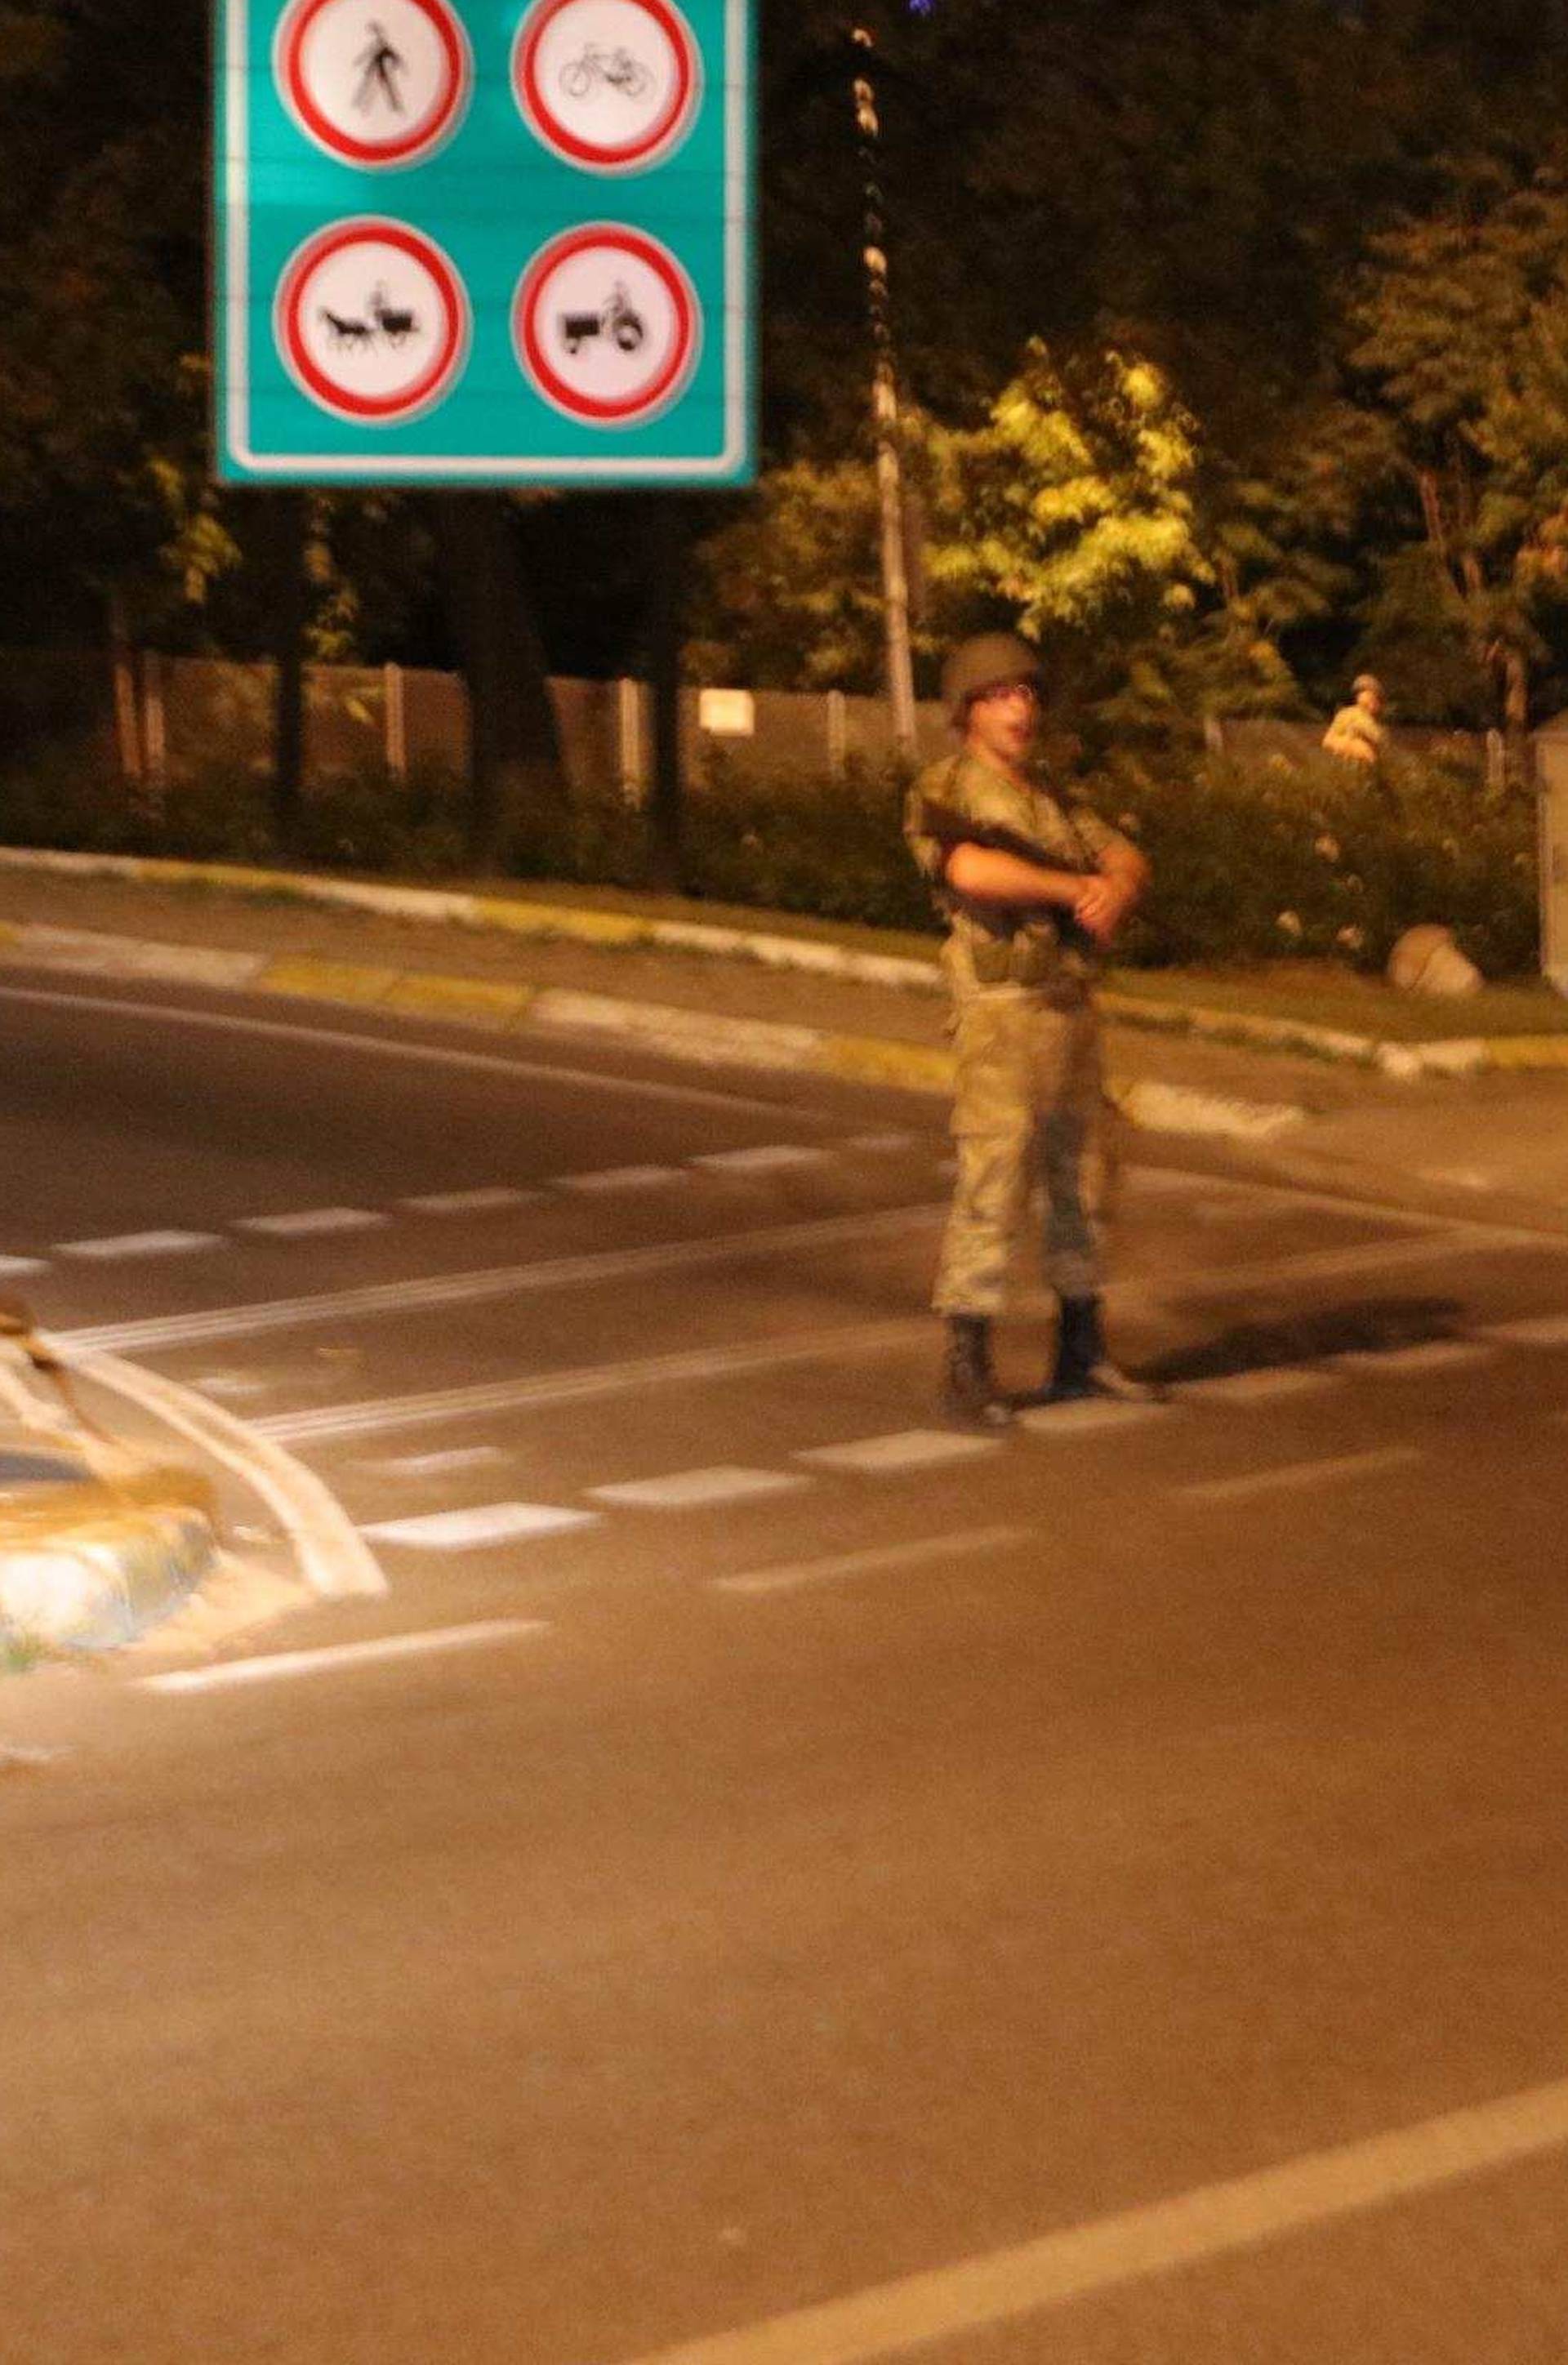 Turkish military block access to the Bosphorus bridge, which links the city's European and Asian sides, in Istanbul